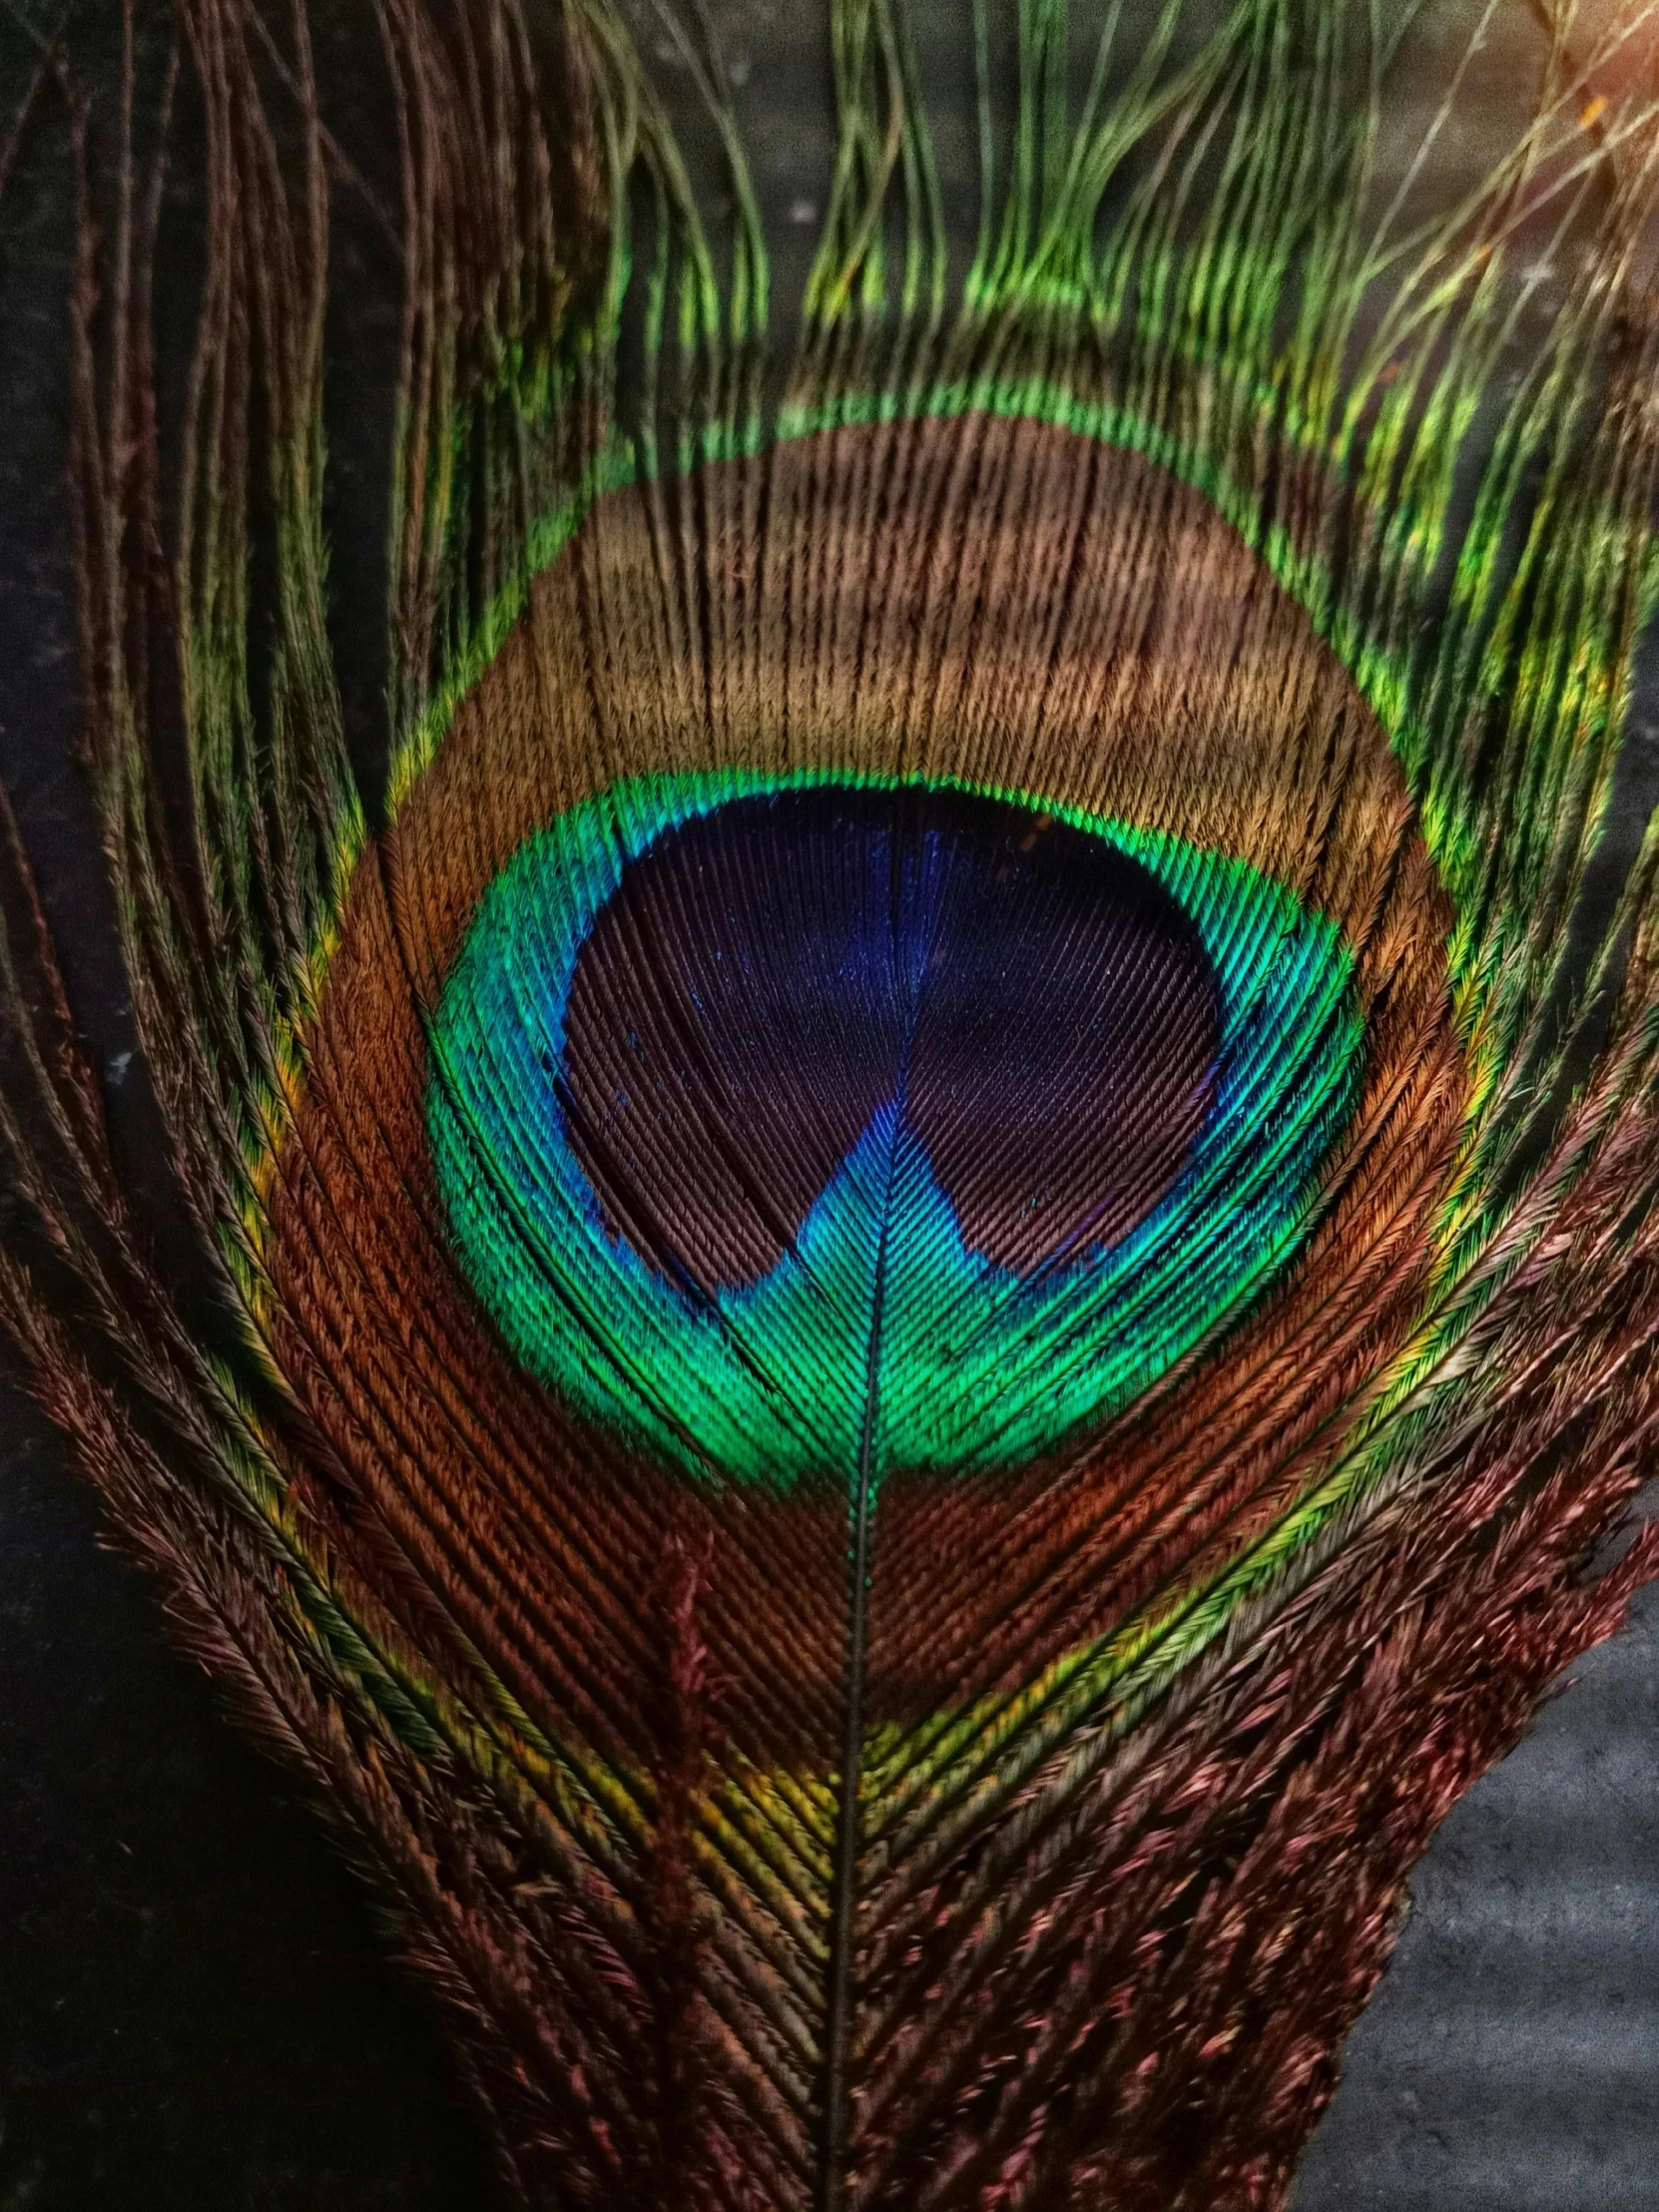 a bird's feathers that is showing it's feathers